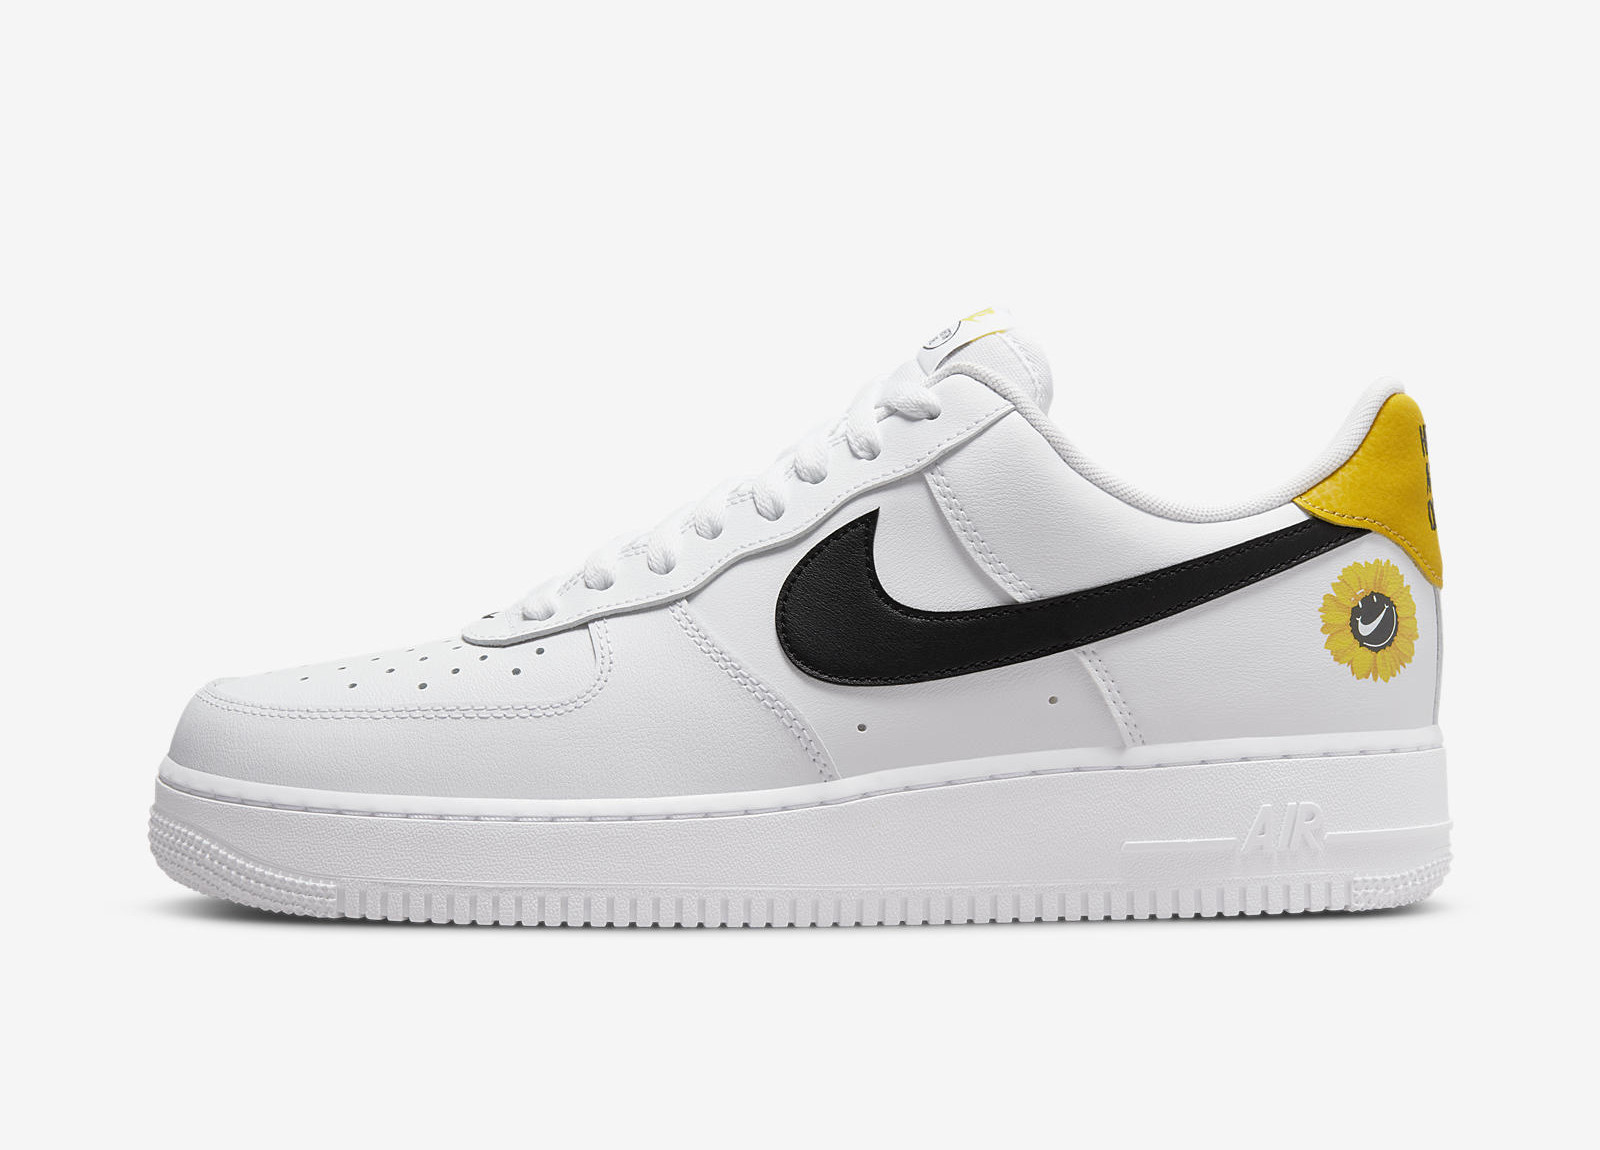 Nike Air Force 1 Low
« Have A Nike Day »